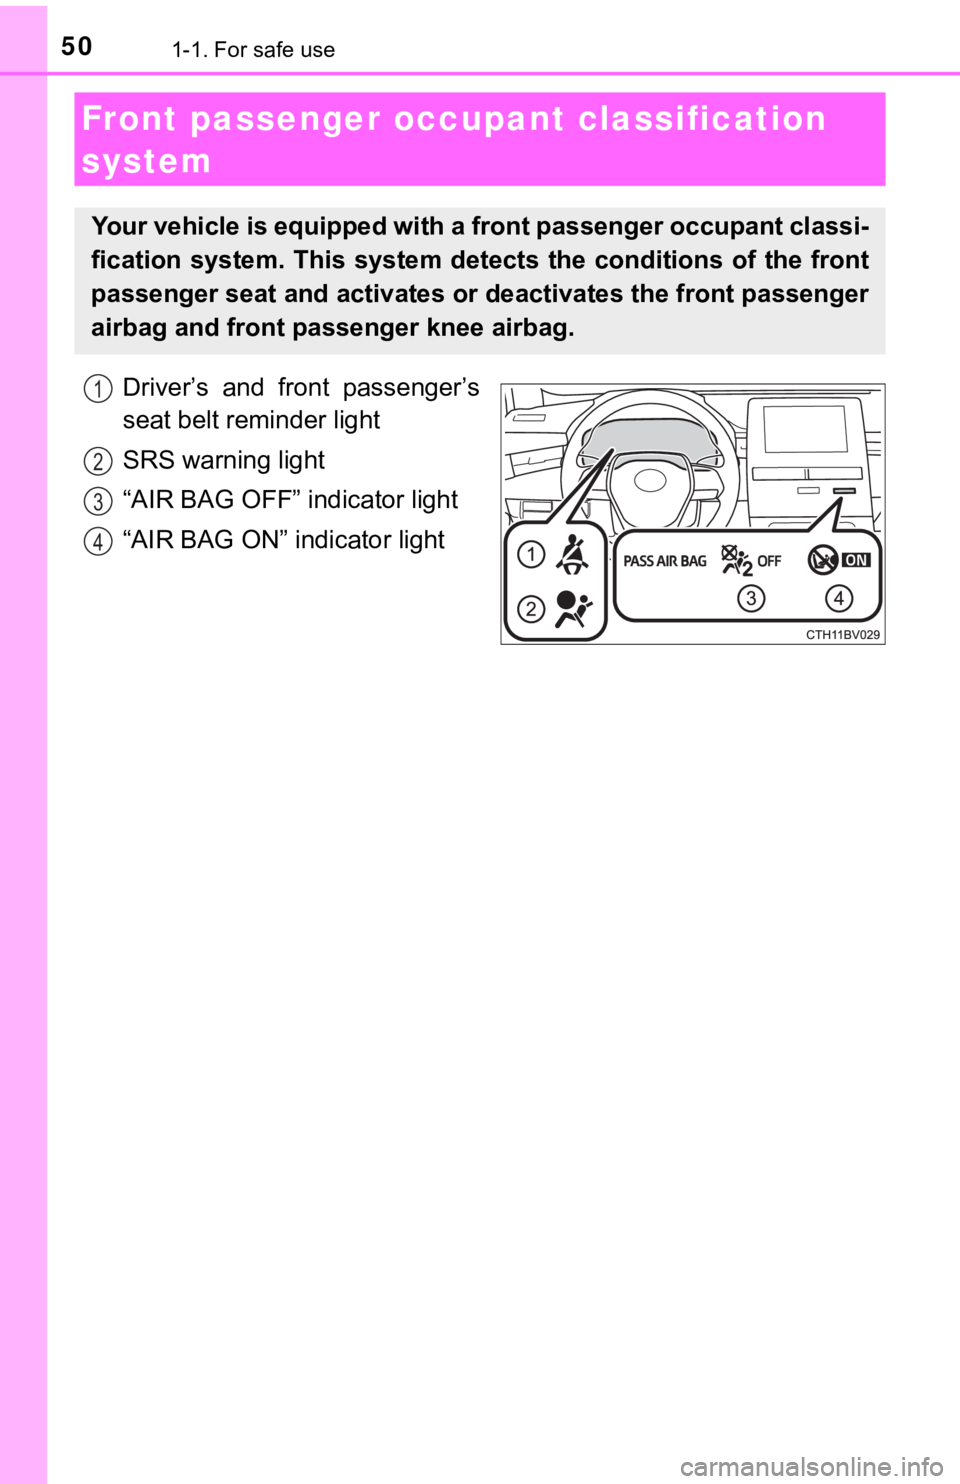 TOYOTA AVALON 2021  Owners Manual (in English) 501-1. For safe use
Driver’s  and  front  passenger’s
seat belt reminder light
SRS warning light
“AIR BAG OFF” indicator light
“AIR BAG ON” indicator light
Front passenger occupant classif